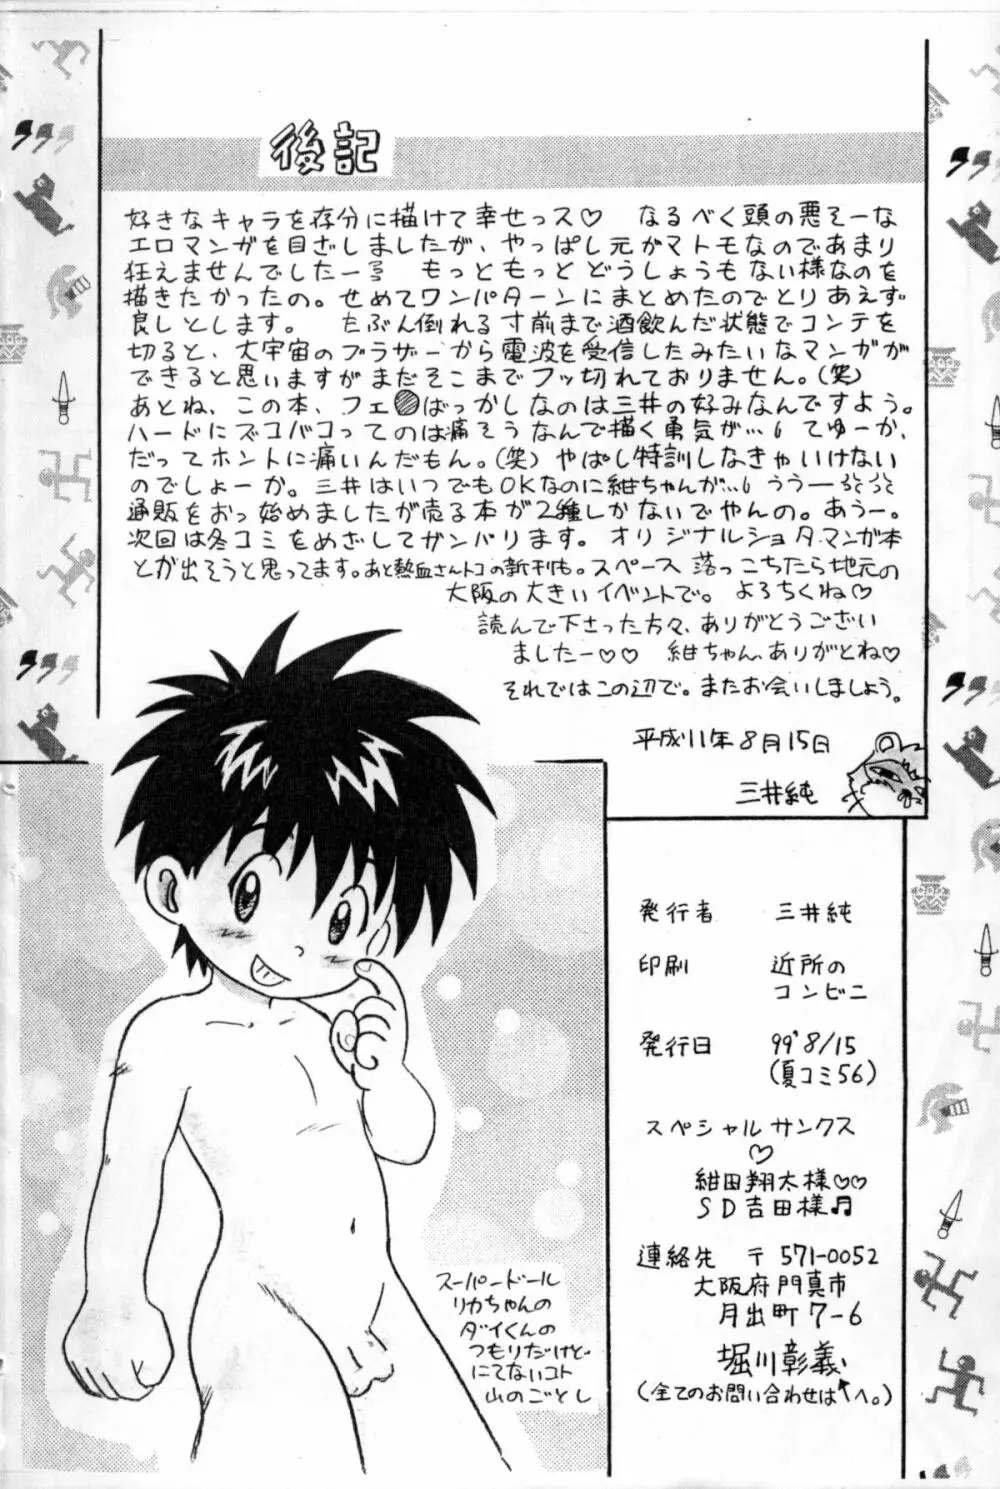 Mitsui Jun - Dreamer’s Only - Anime Shota Character Mix Page.25